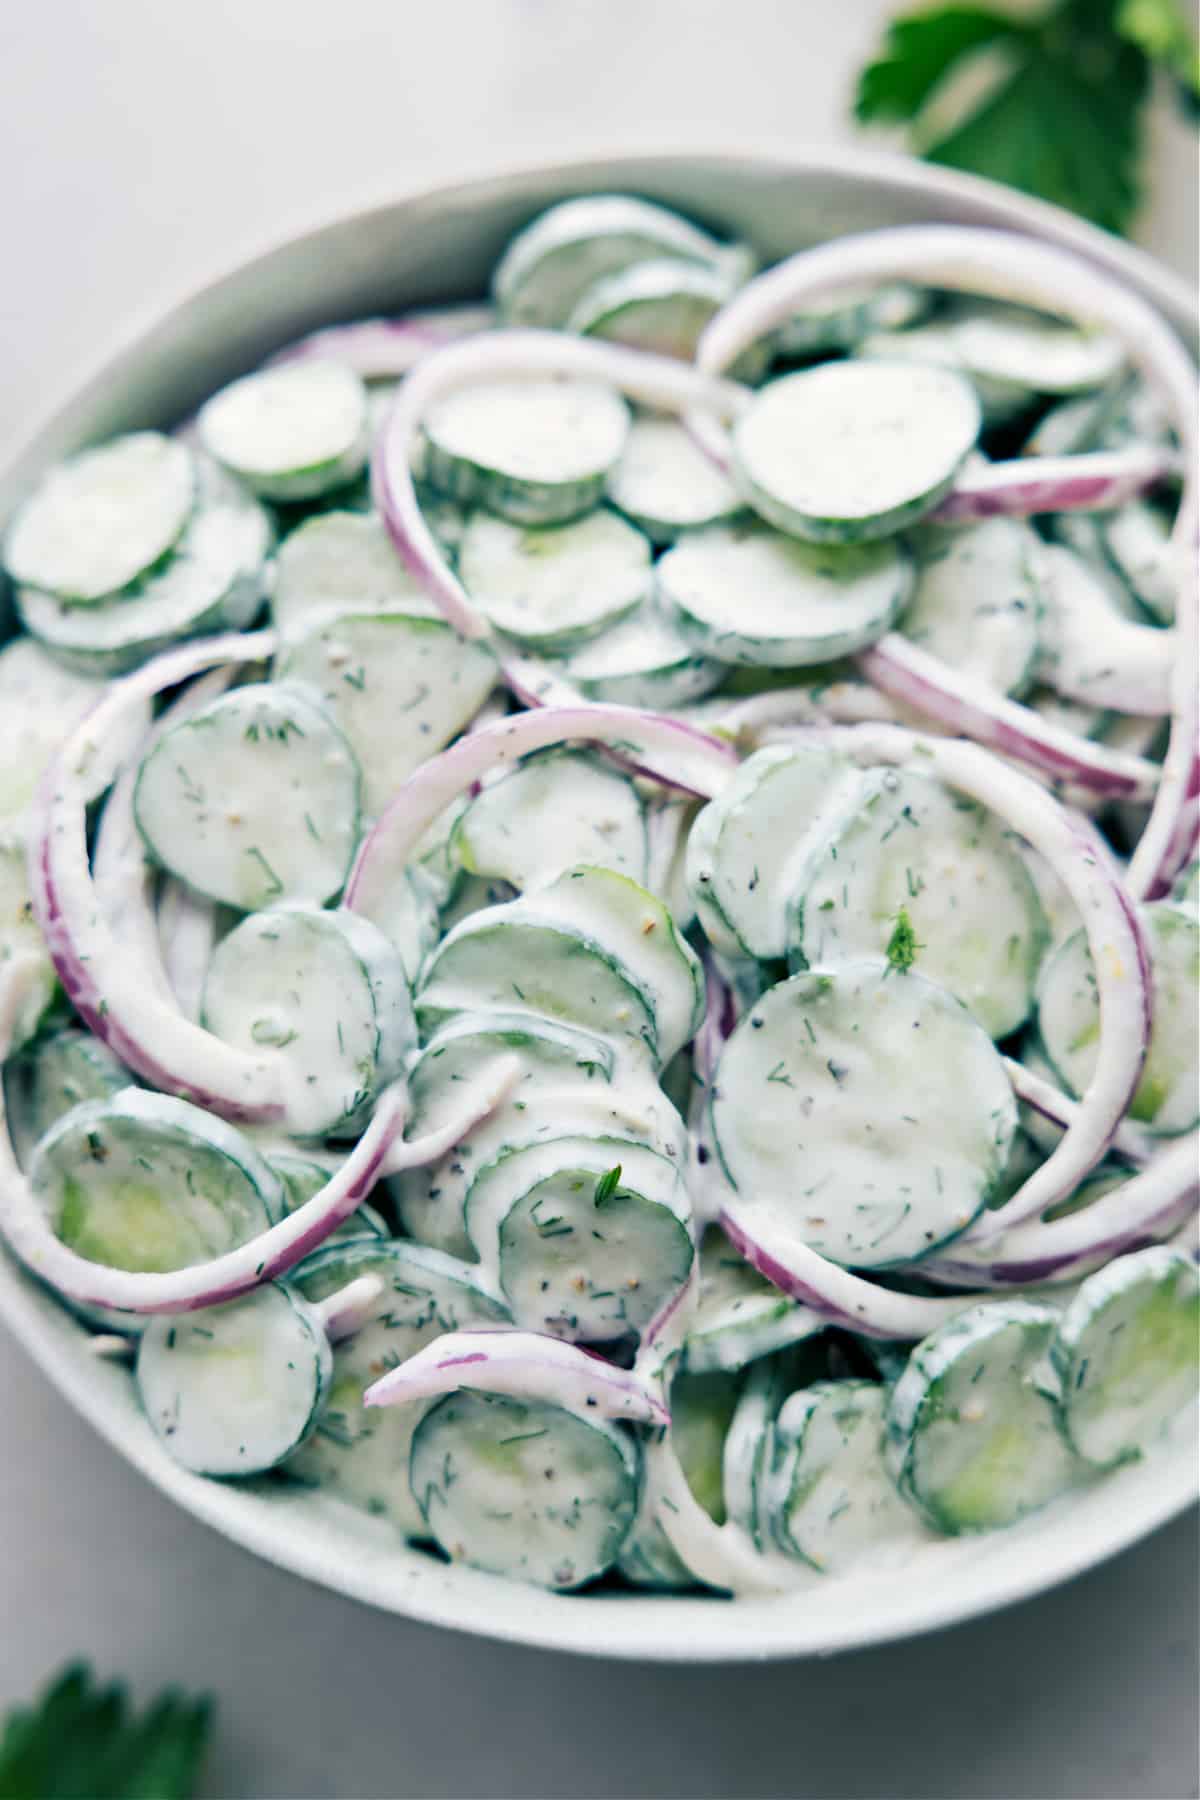 Creamy cucumber salad with sour cream in a bowl ready to be enjoyed.